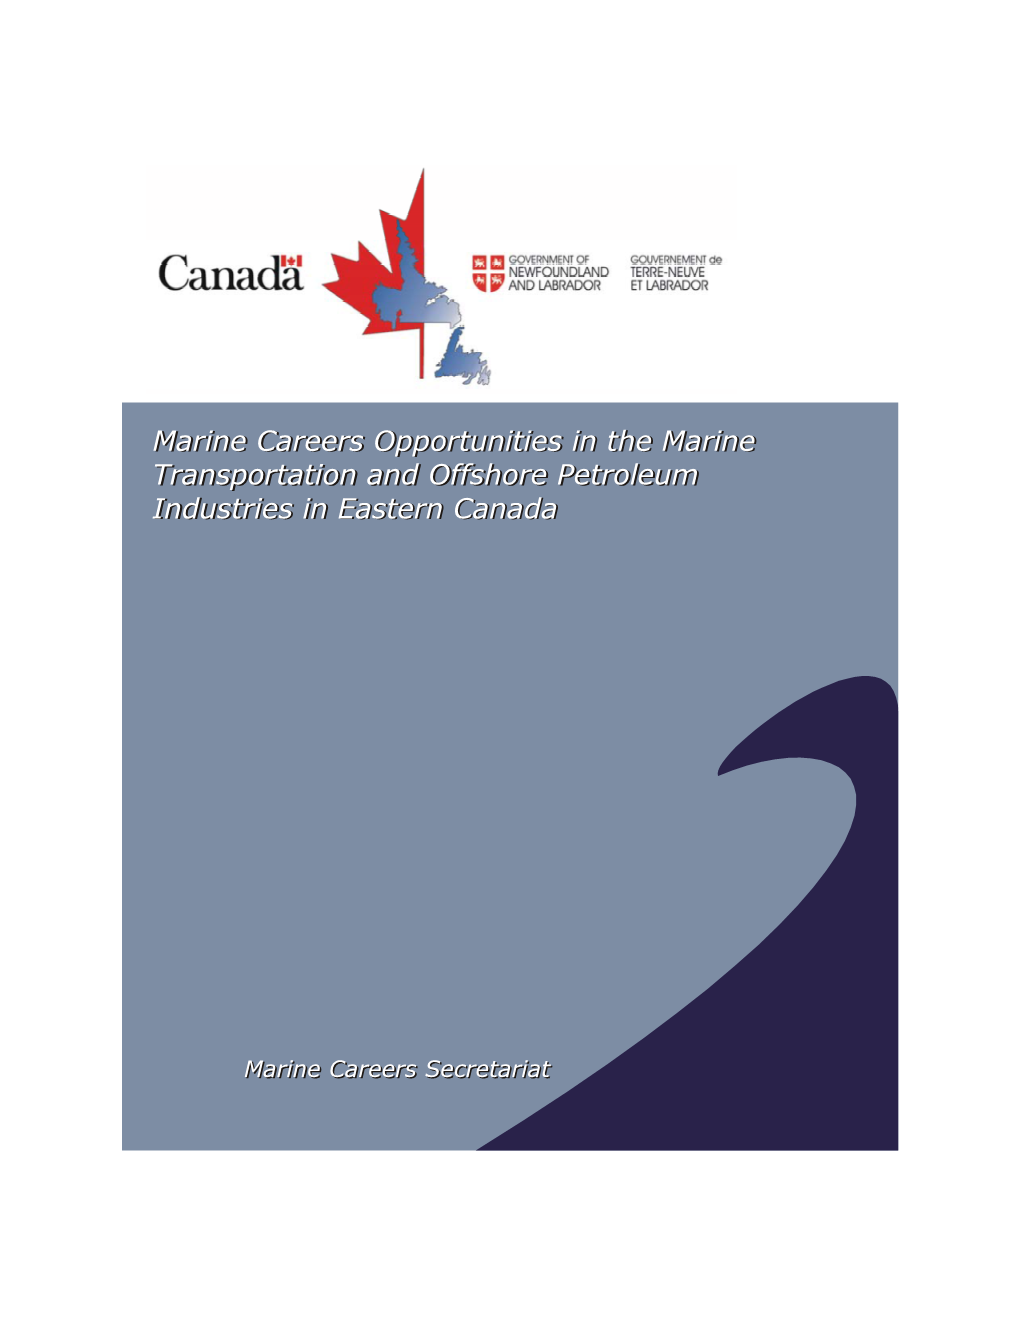 Marine Careers Opportunities in the Marine Transportation and Offshore Petroleum Industries in Eastern Canada